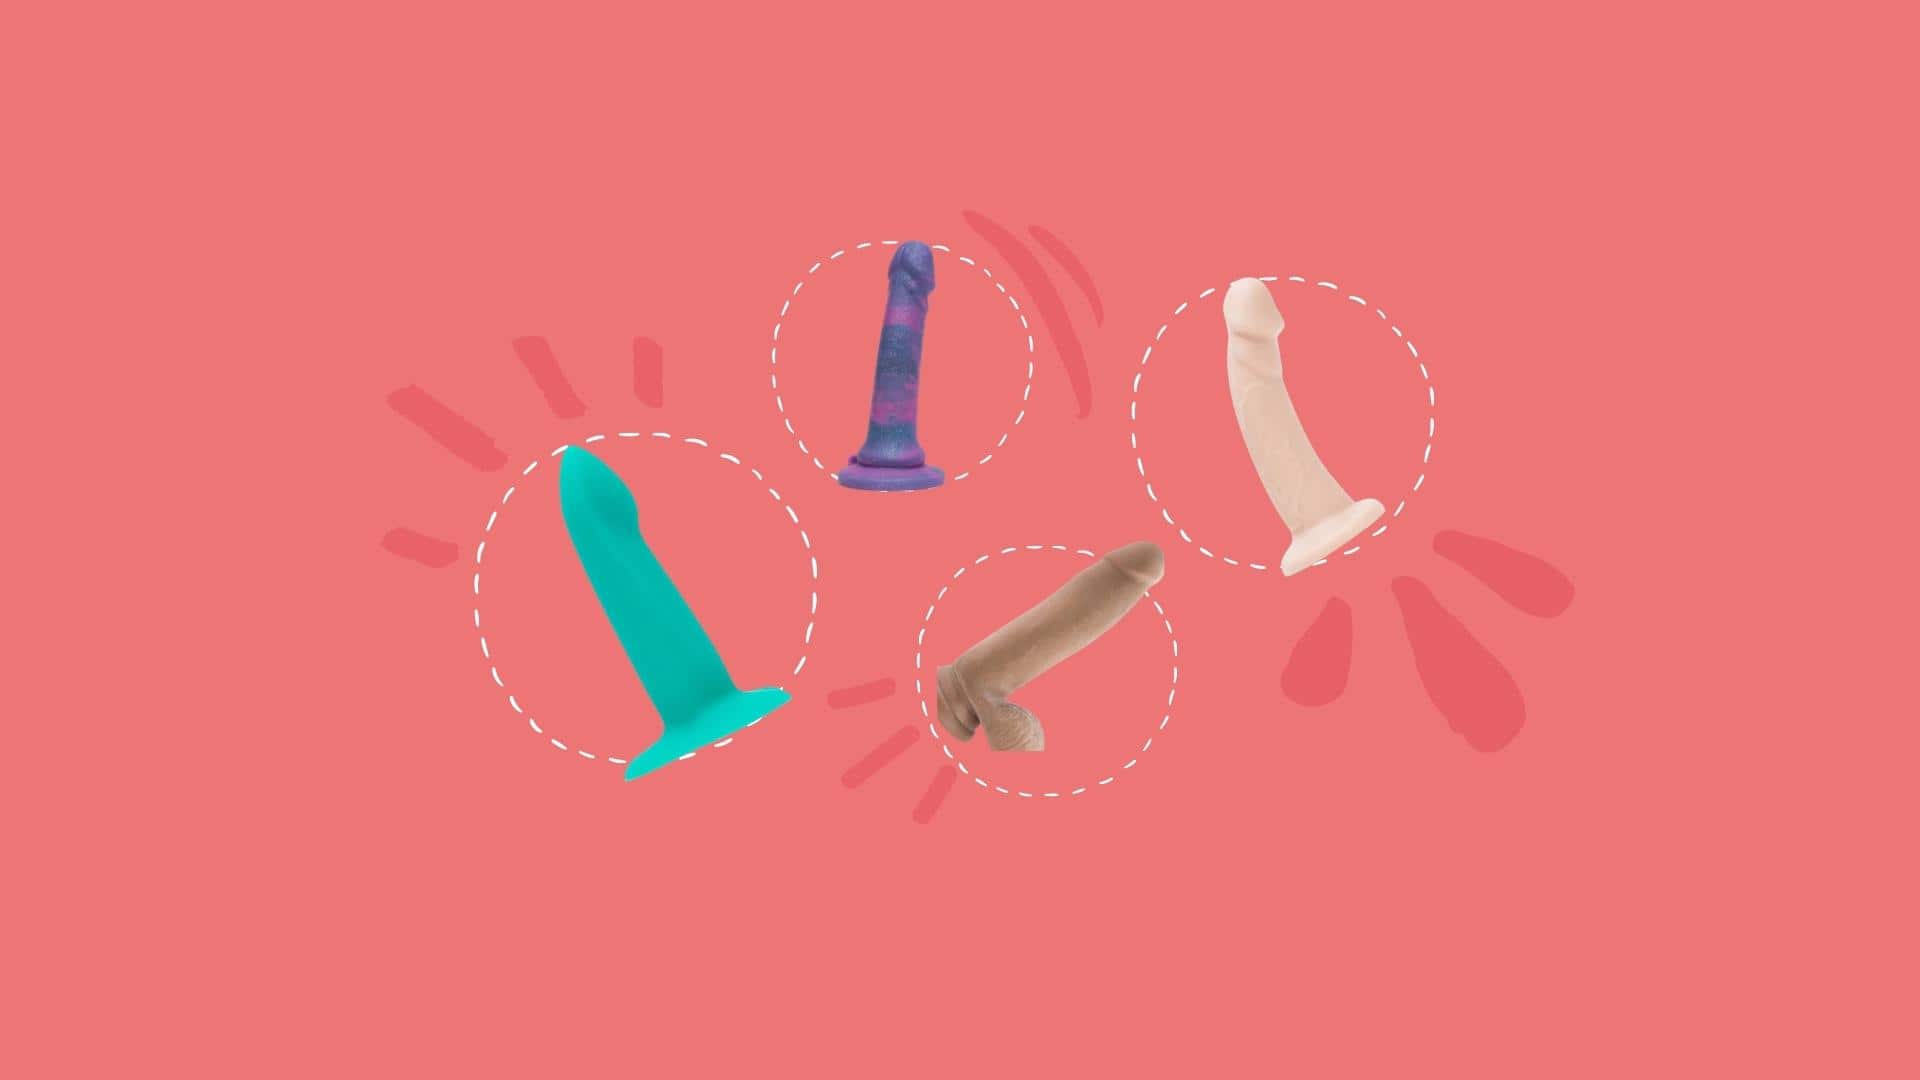 The 12 Best Soft Dildos for Squishes to Make You Squeal